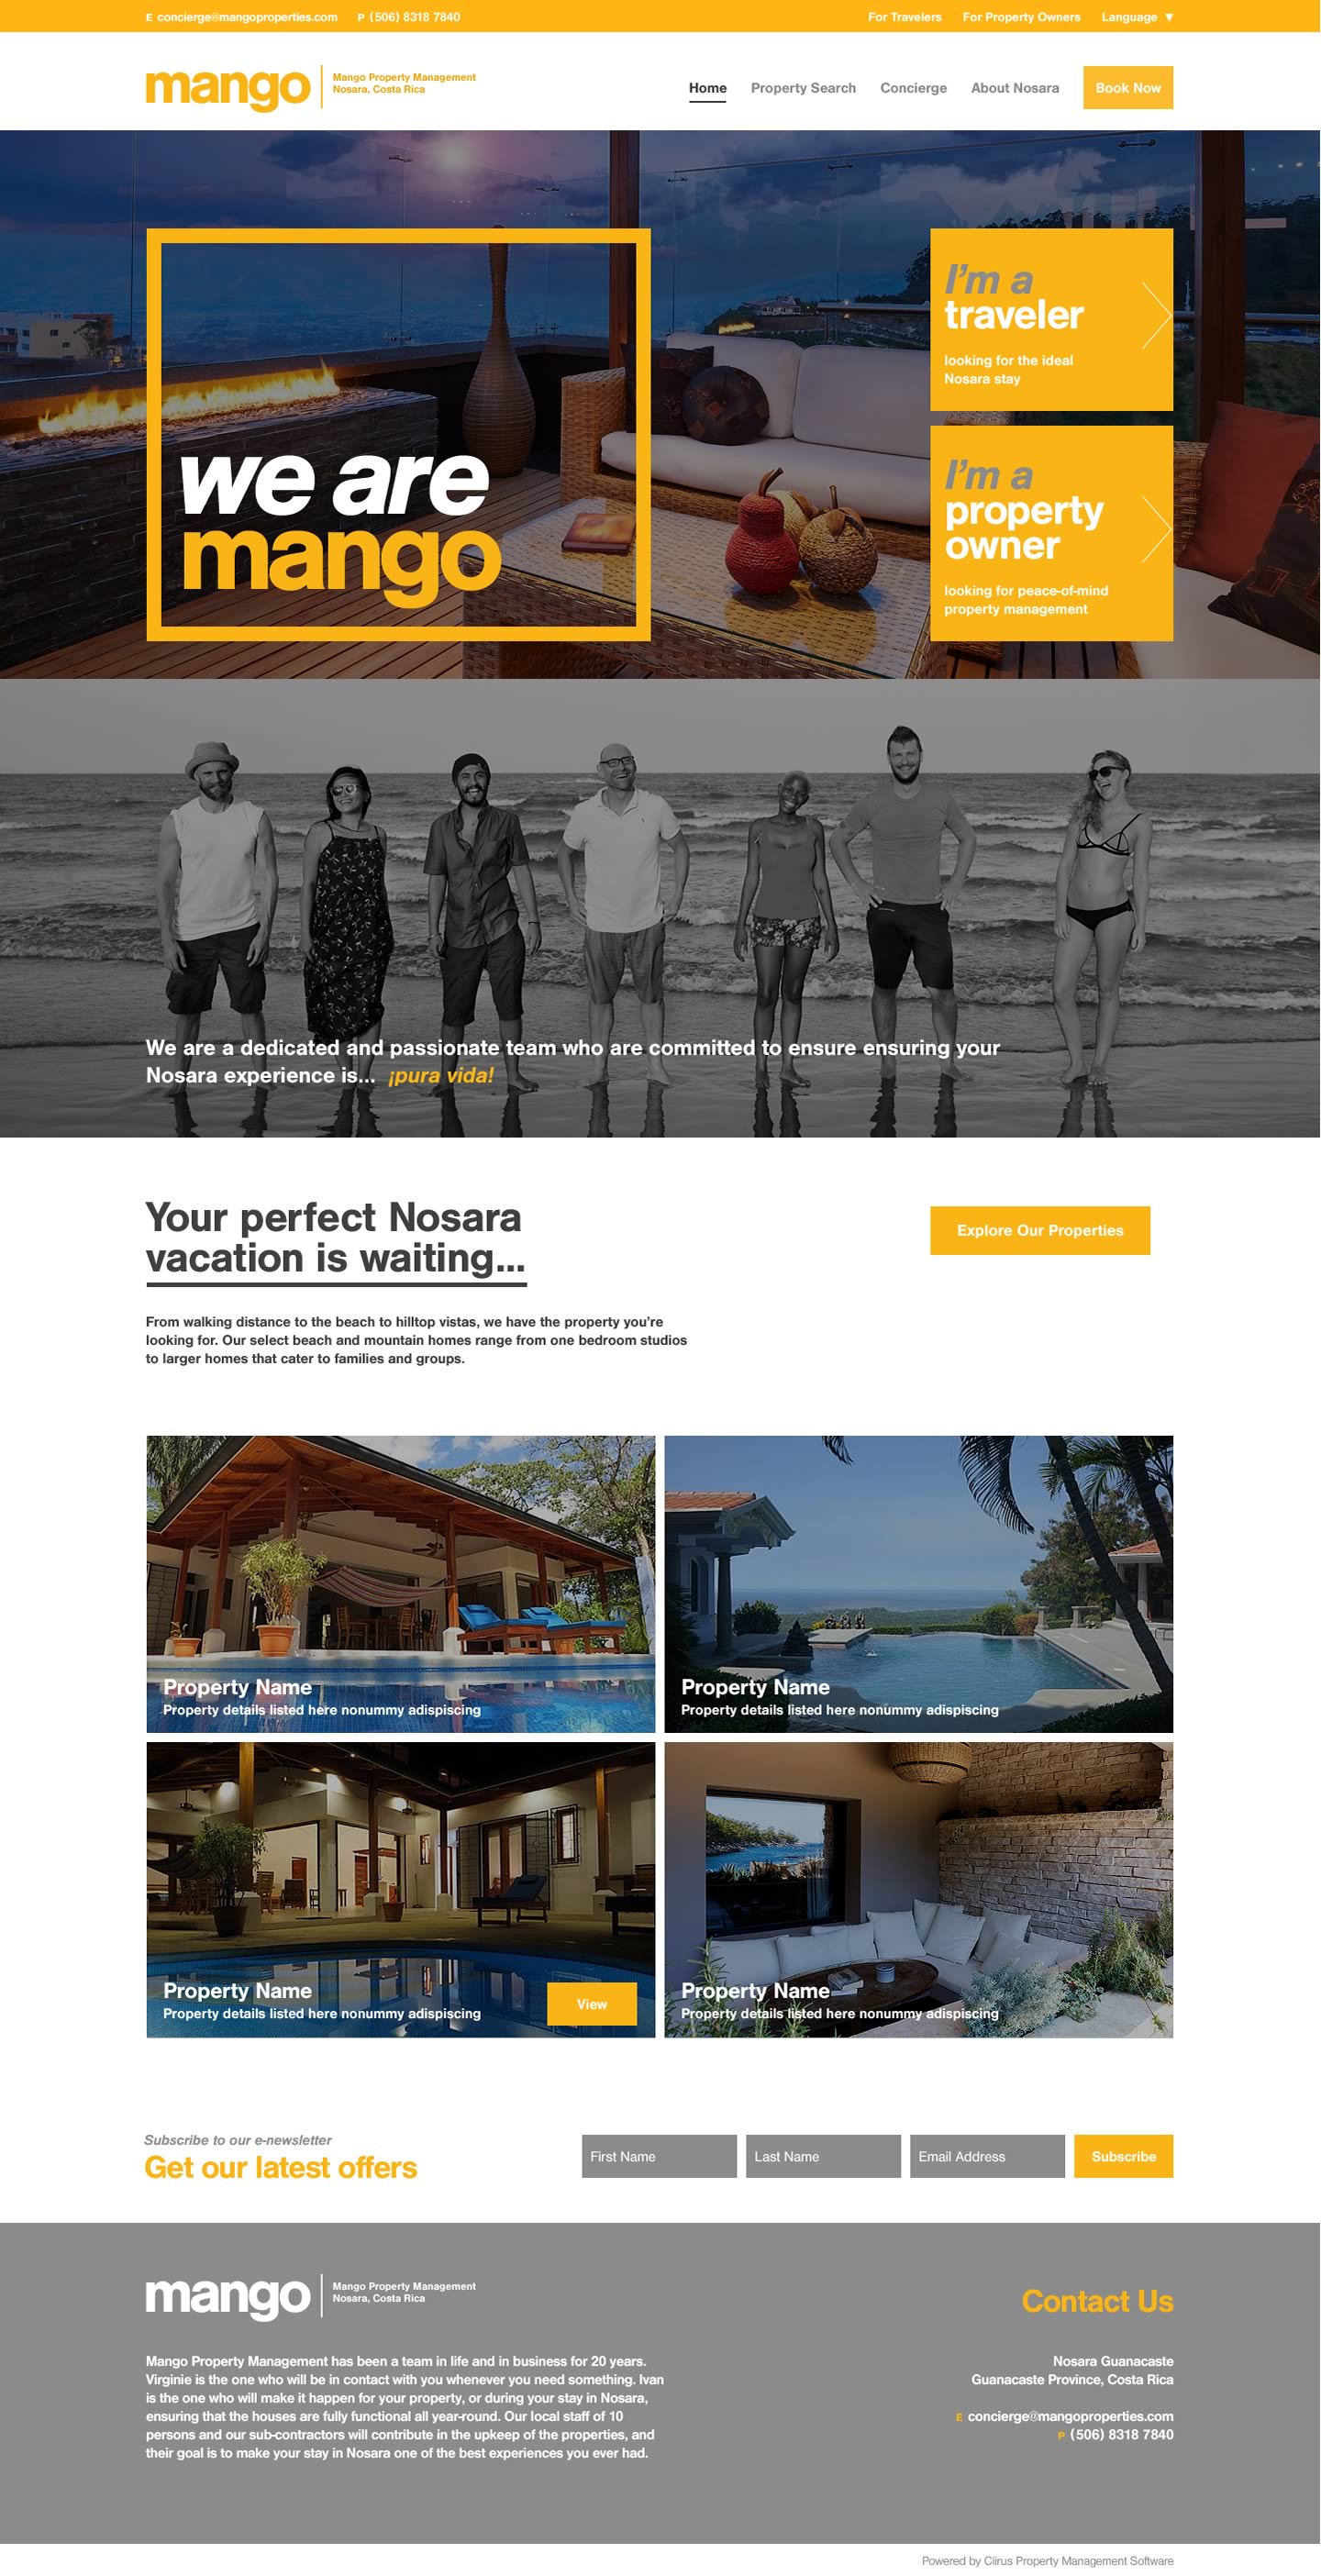 Capture of the full homepage from the Mango Property Management website